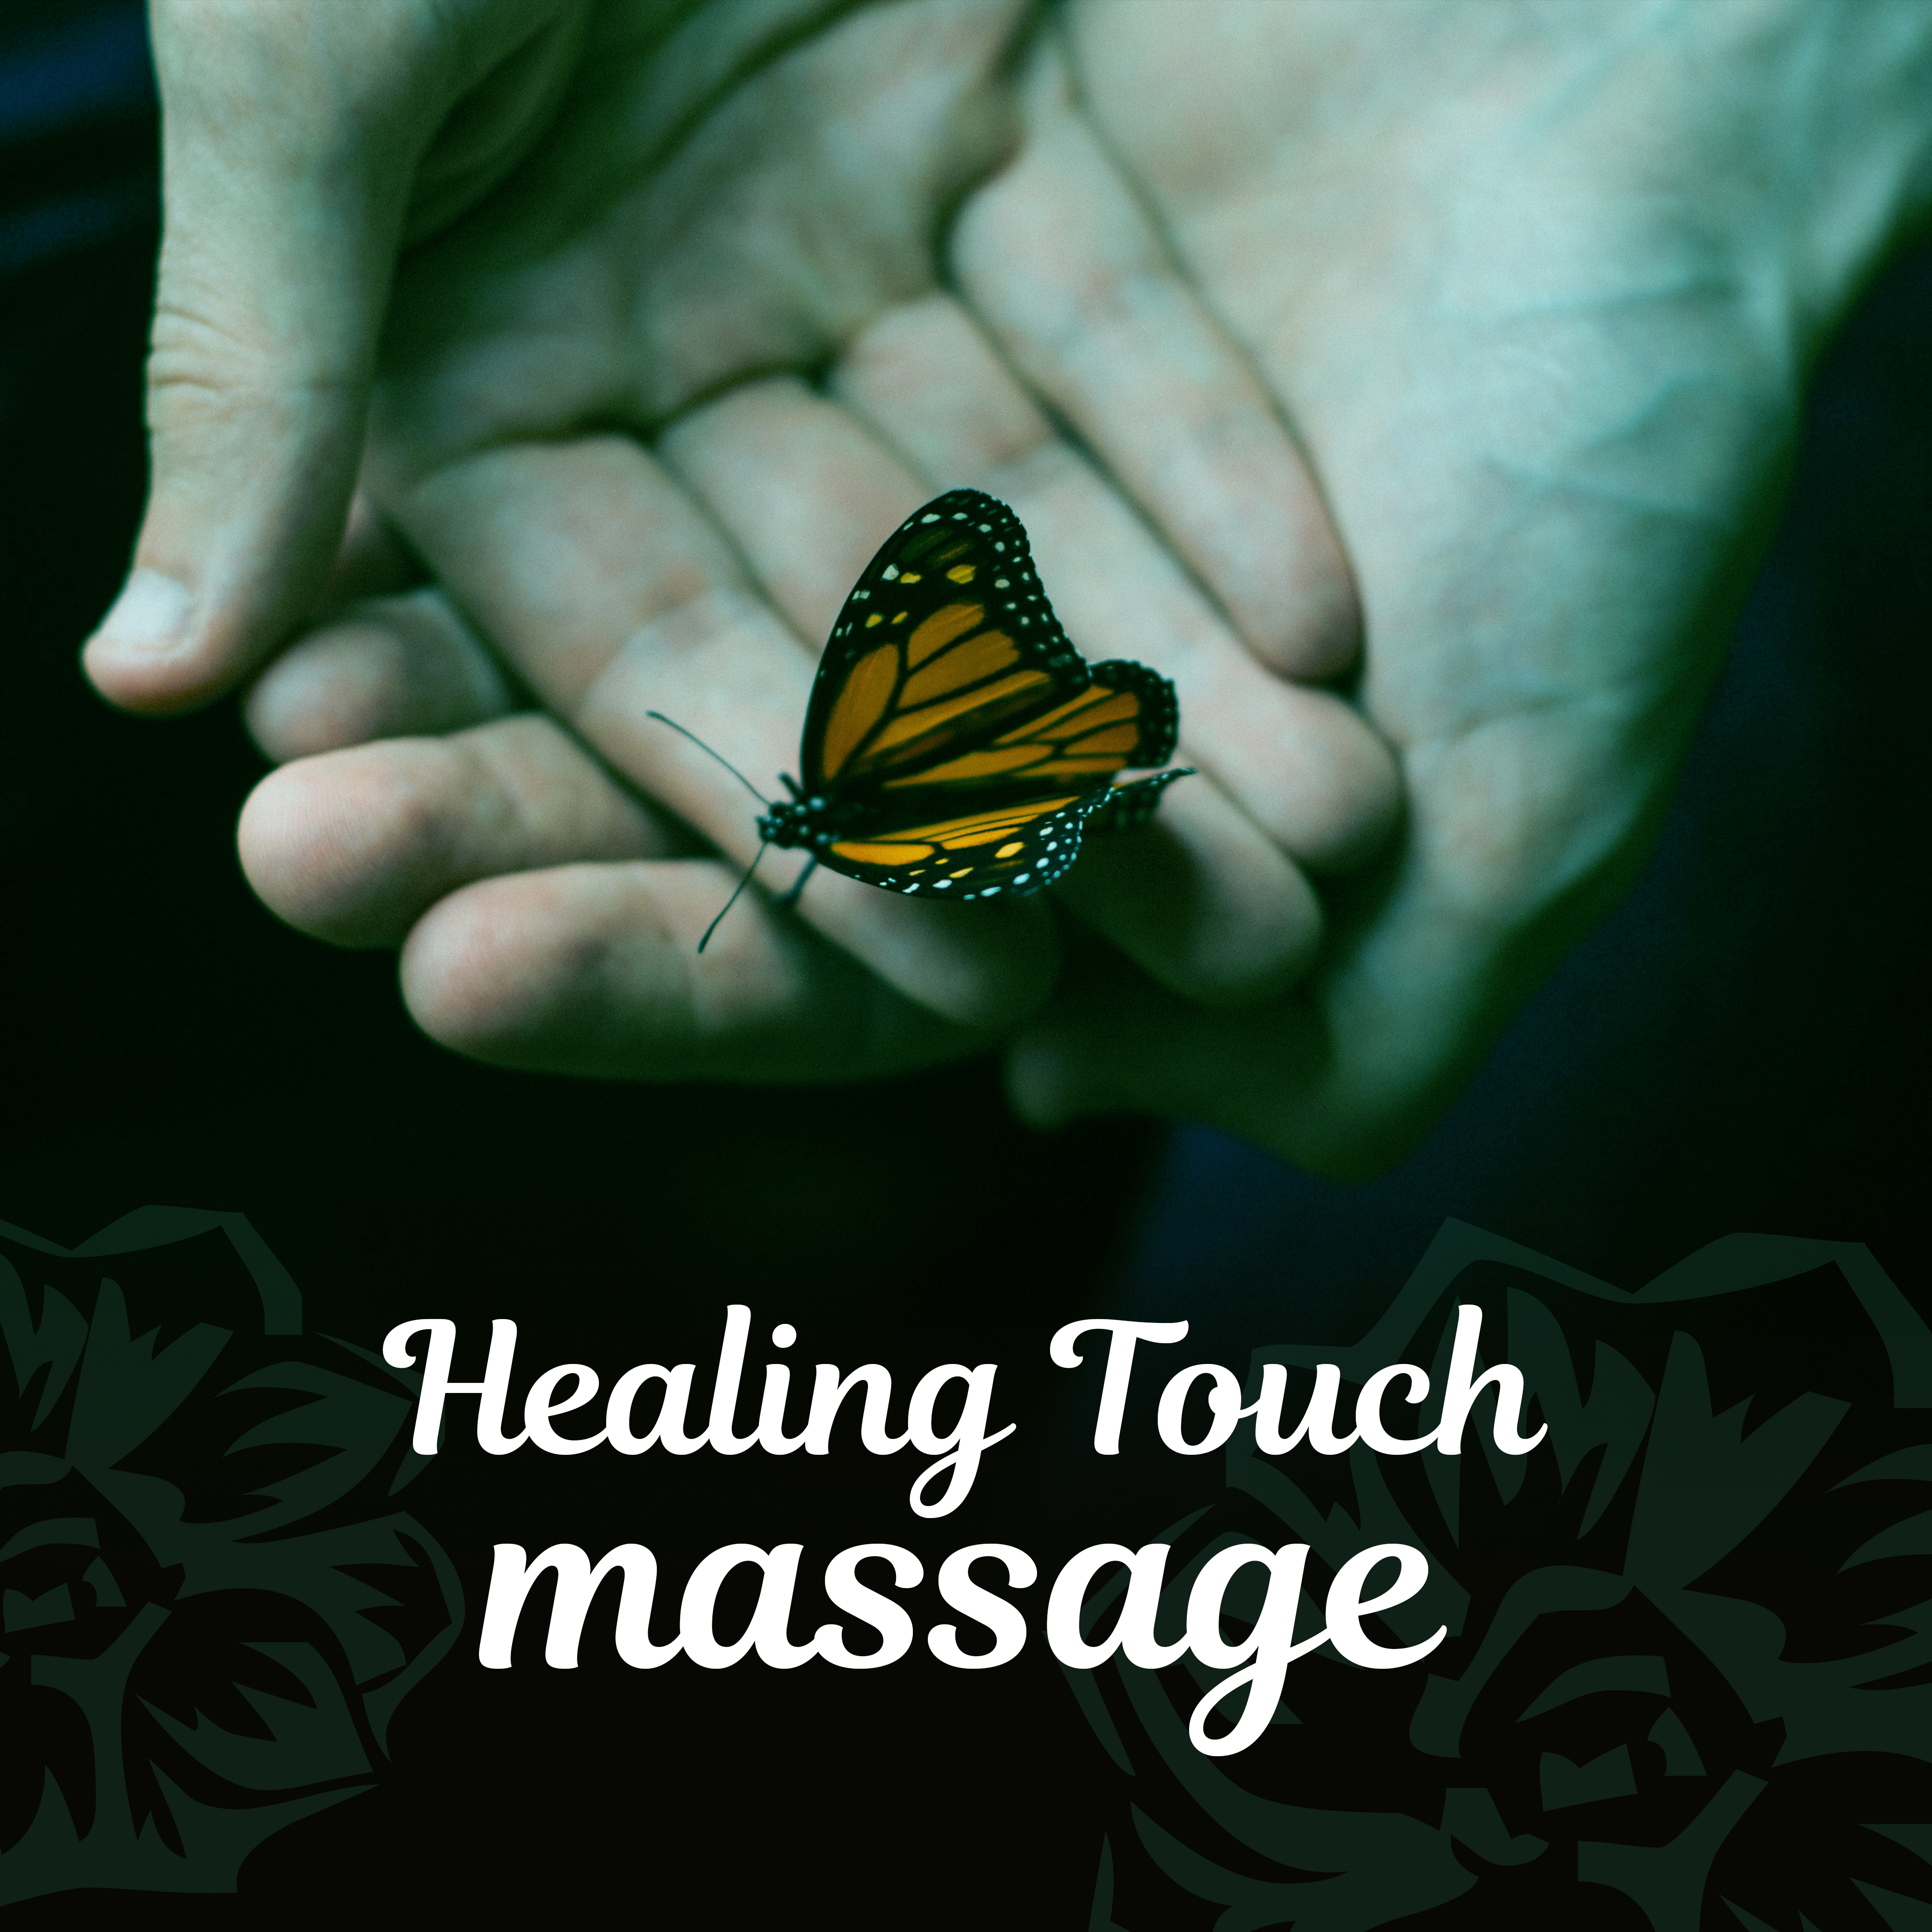 Healing Touch Massage – Relaxing Music, Full of Nature Sounds, Peceful Melodies for Stress Relief, Relax